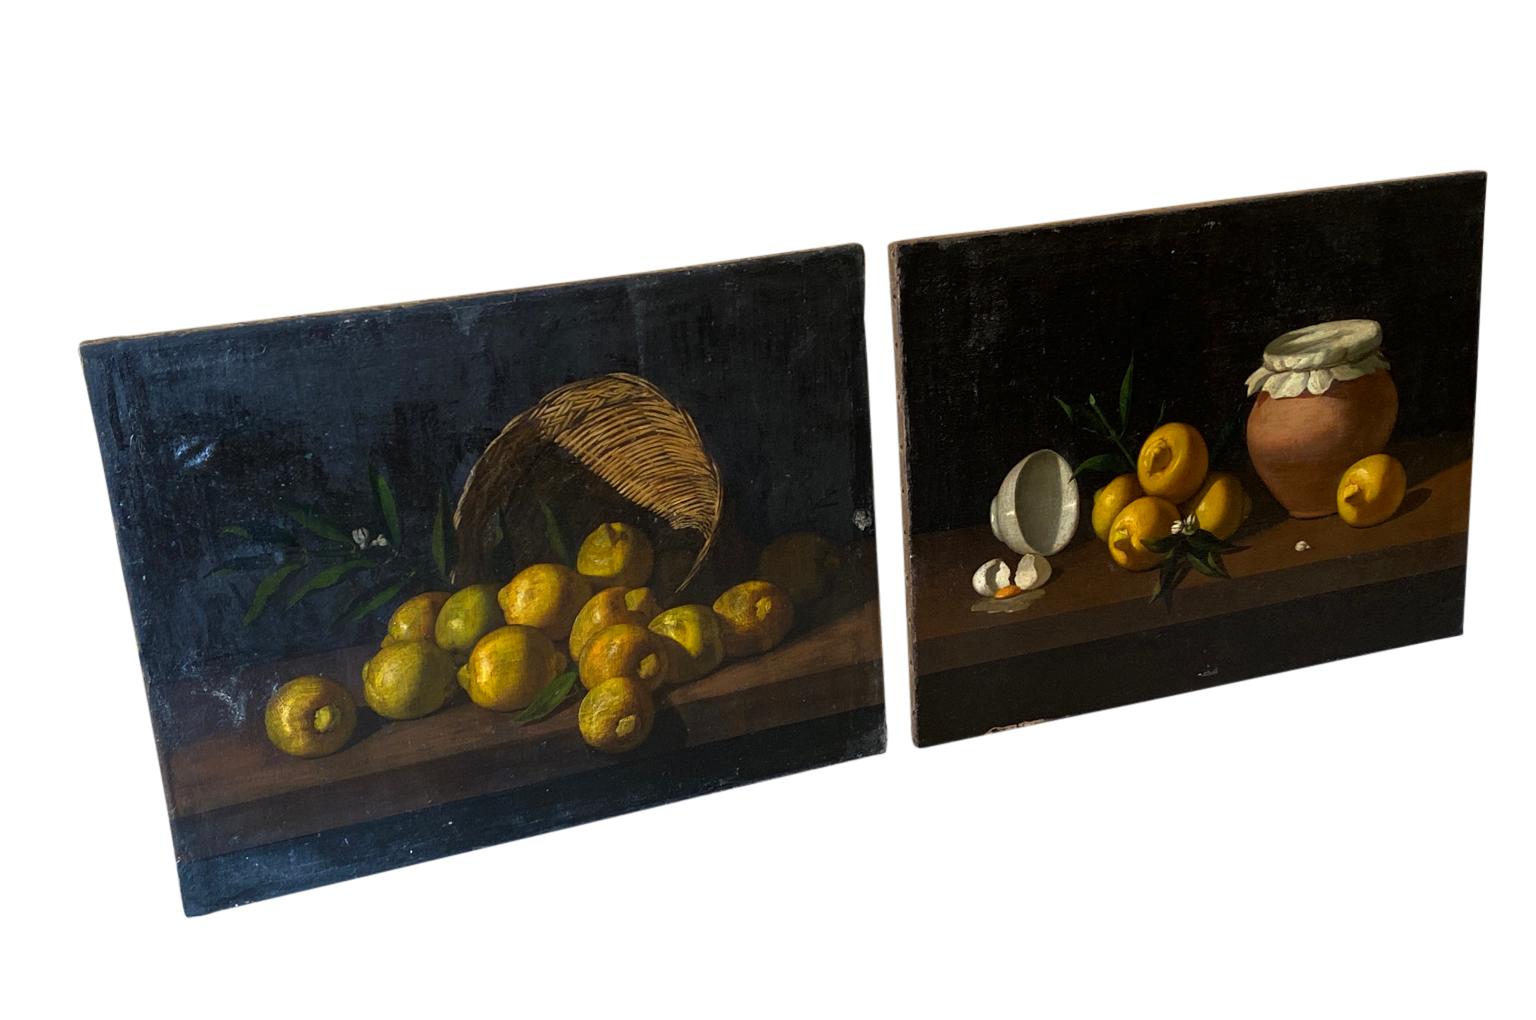 A very elegant pair of 17th century Spanish oil on canvas paintings - Nature Morte. Wonderful rich color. Perfect for any kitchen or living space.